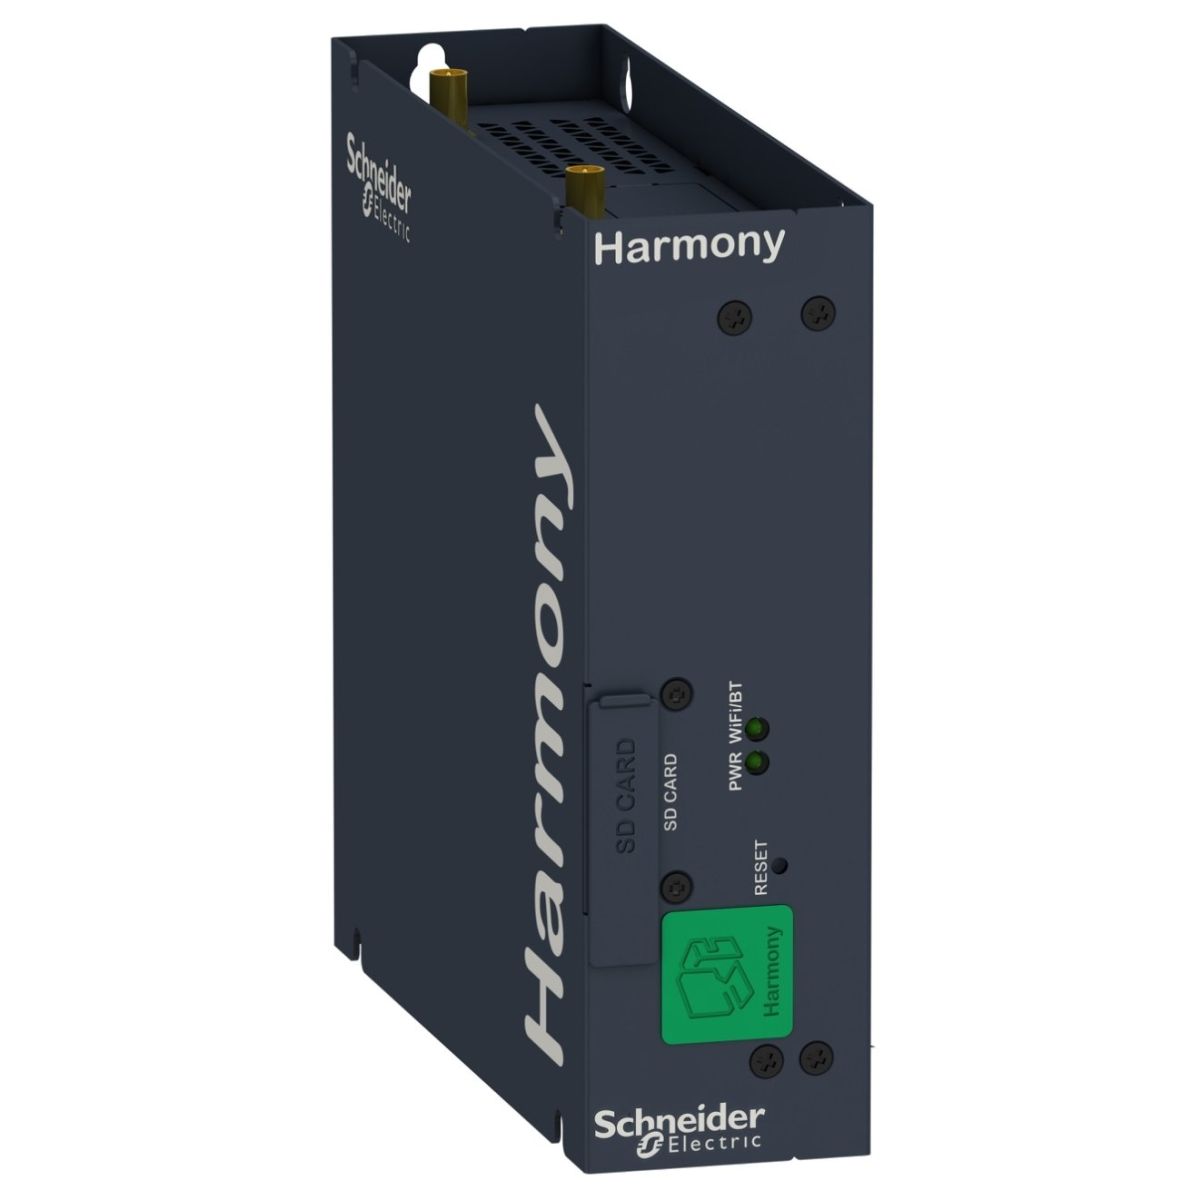 Scheneider Electric EV charge controller, EcoStruxure EV Charging Expert, 5 charging stations, dynamic charge management